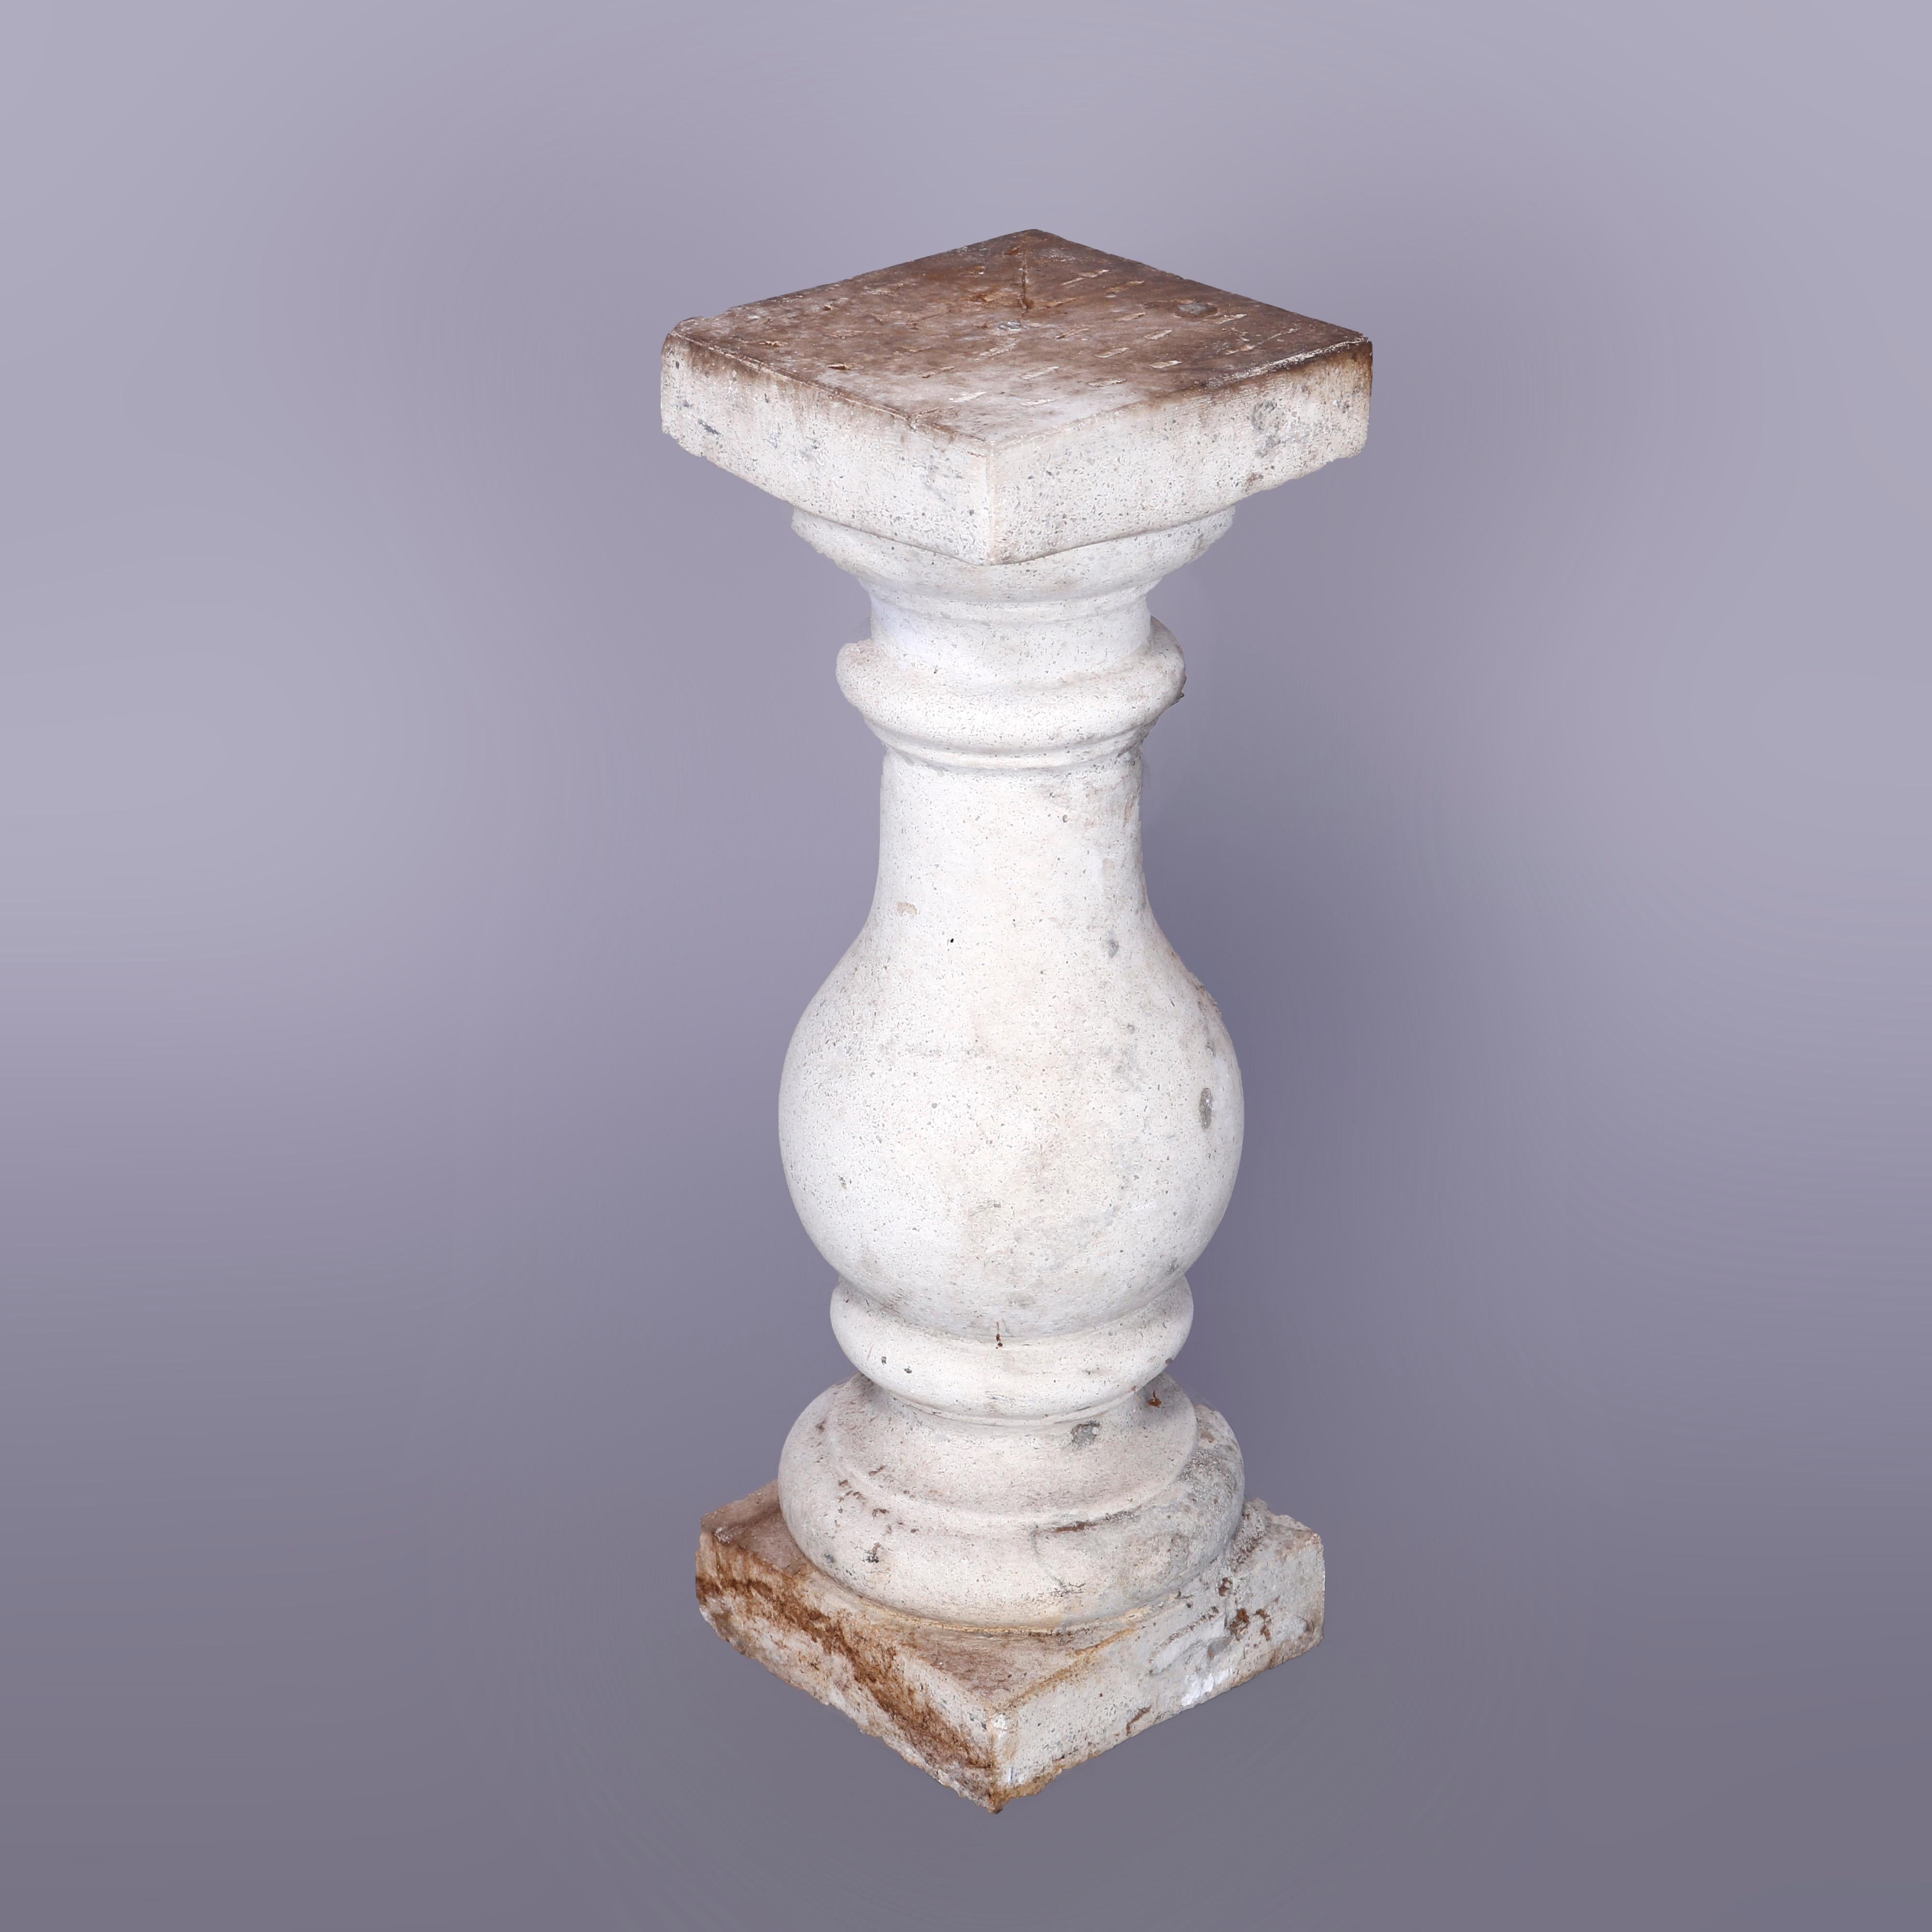 American Classical Cast Hard Stone Balustrade Sculpture or Plant Display Pedestal 20th C For Sale